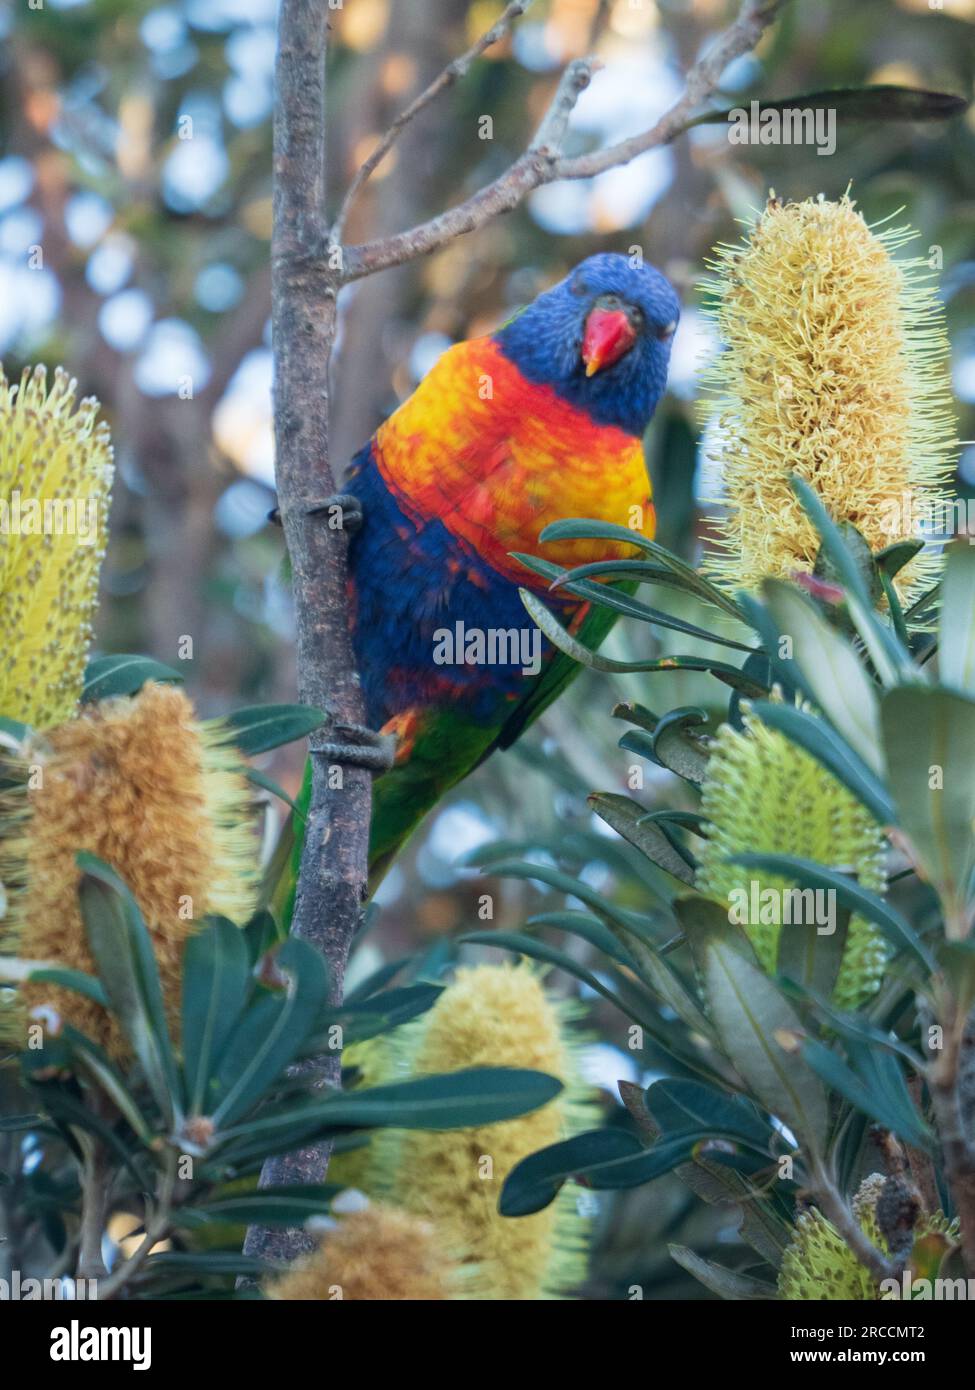 A rainbow Lorikeet, Australian bird perched in a Coast Banksia bush with yellow flower spikes, clutching the stem with its claws Stock Photo